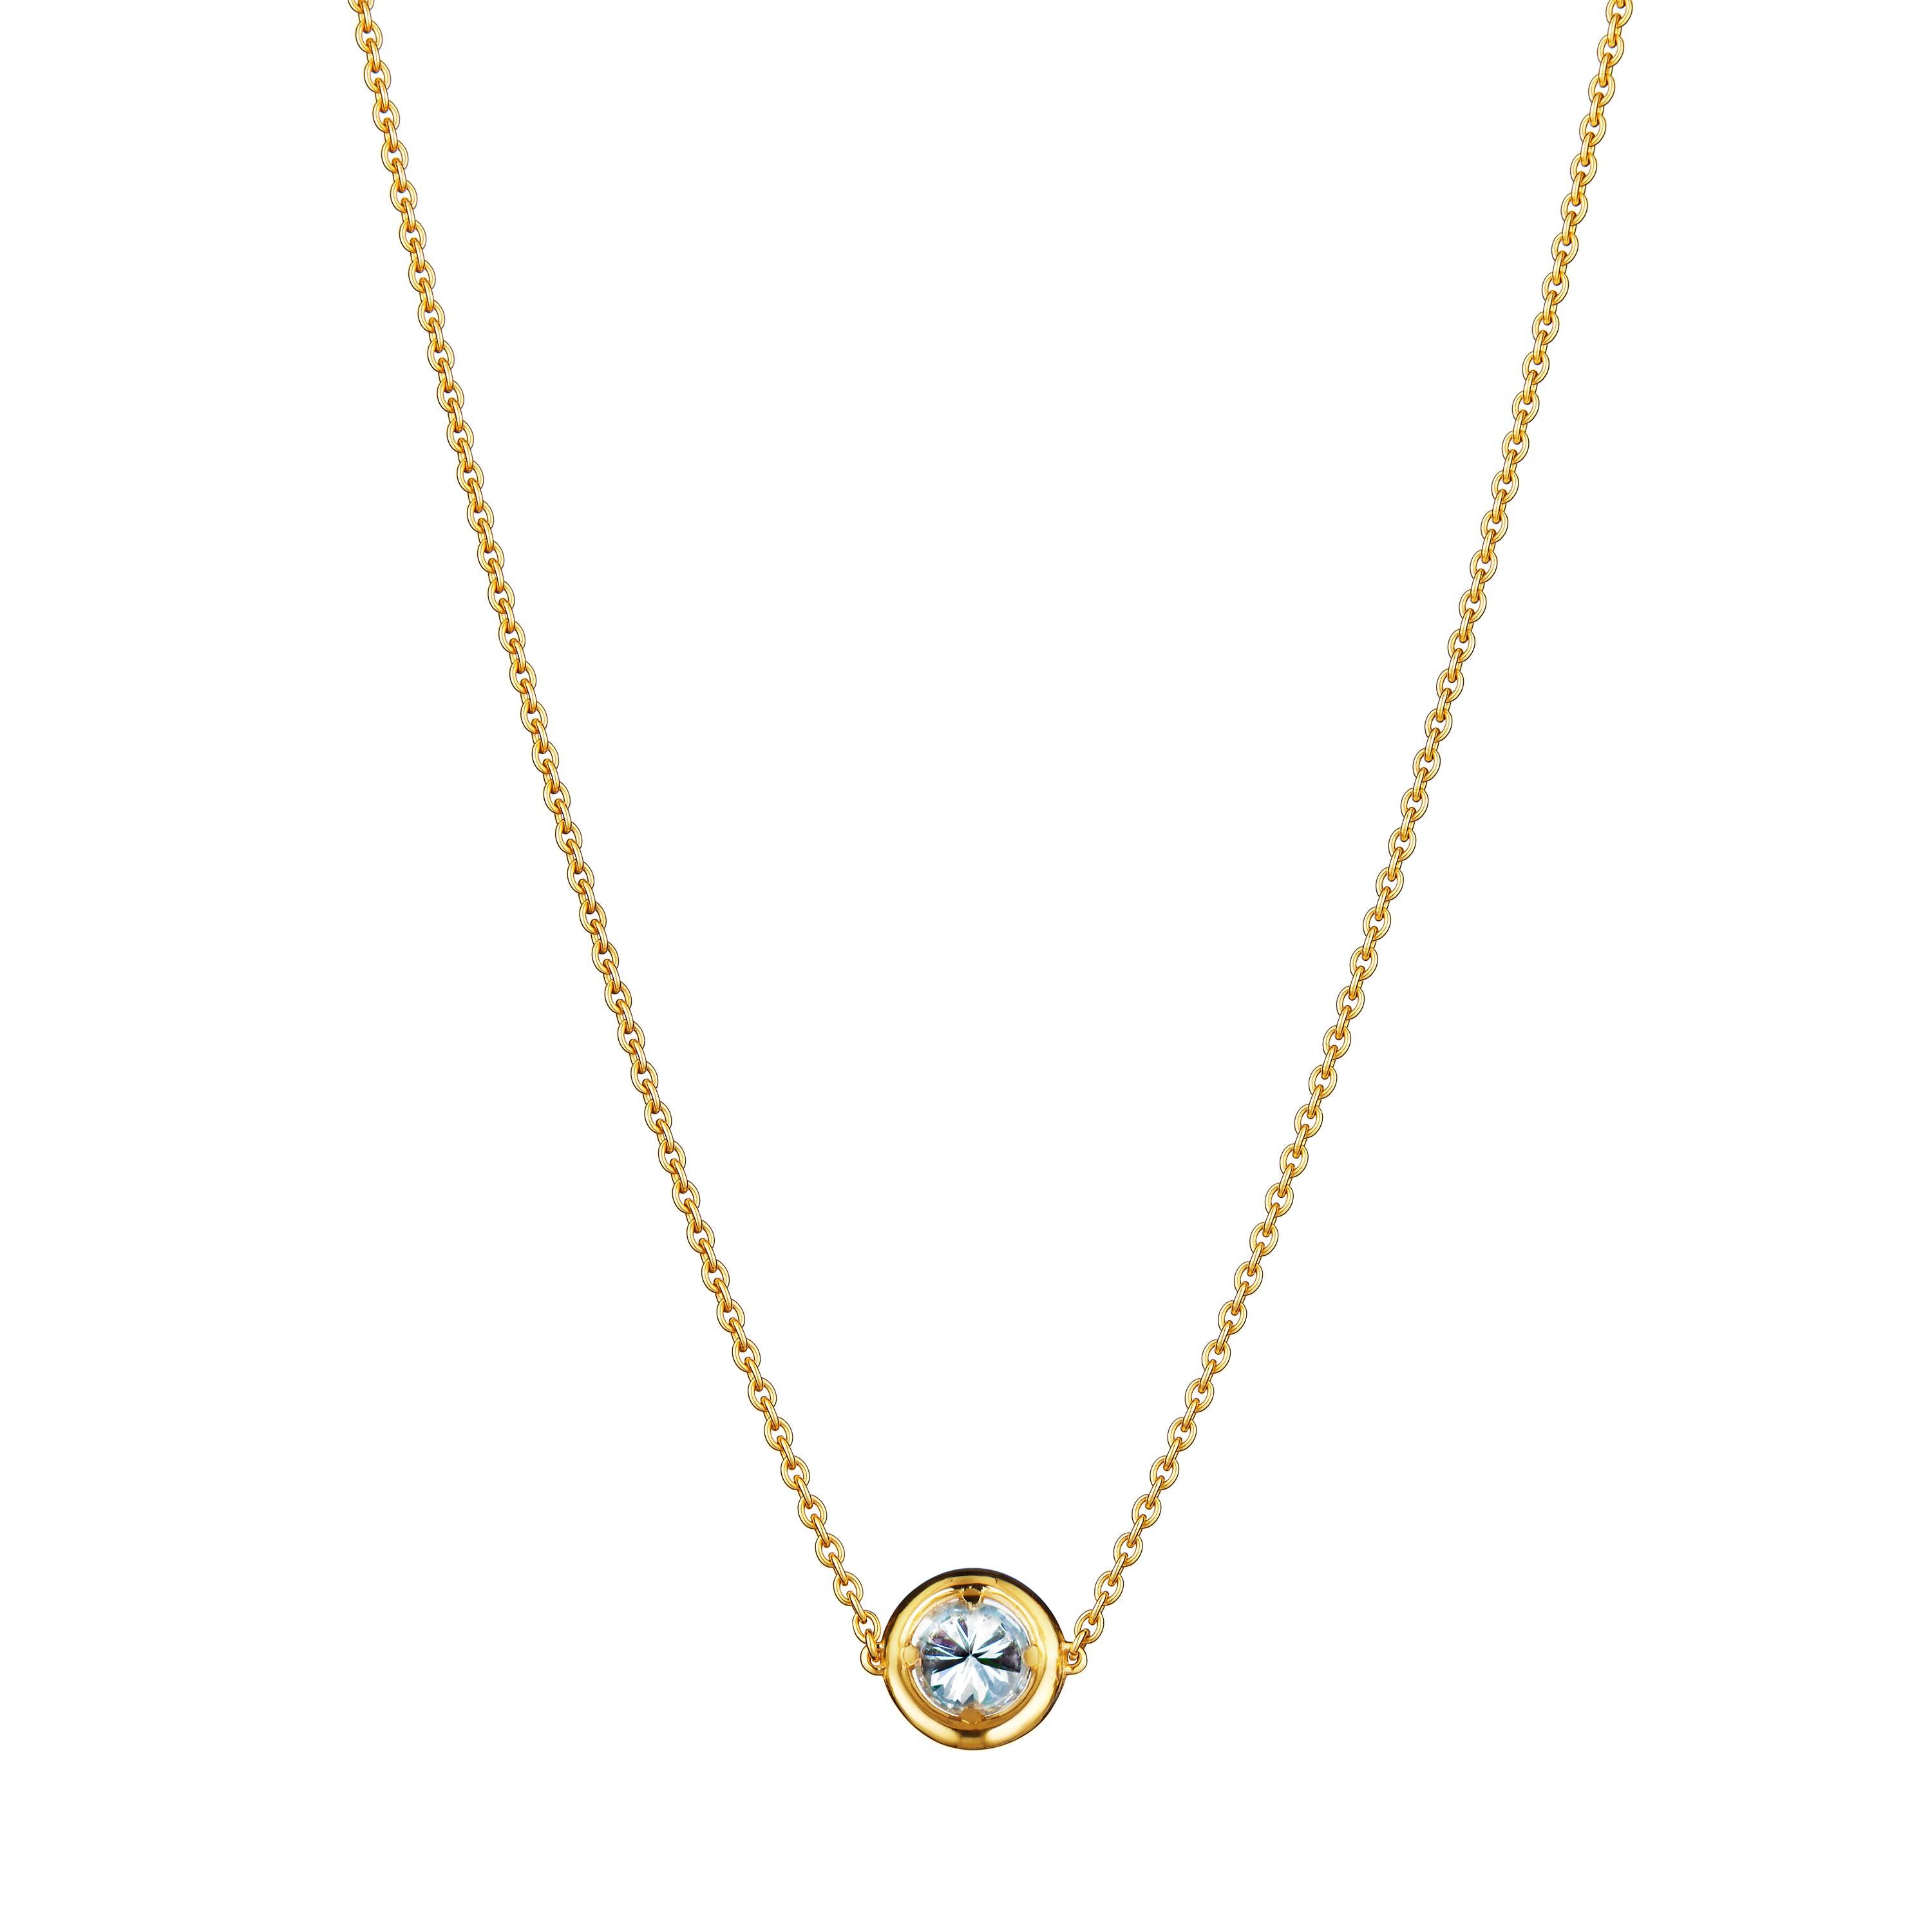 The No.1 Solitaire Pendant is designed to maximise the brilliance and luminosity of the diamond. 

Our distinctive halo is carefully engineered to elevate the diamond, emphasising its size while strengthening and protecting the stone’s integrity.